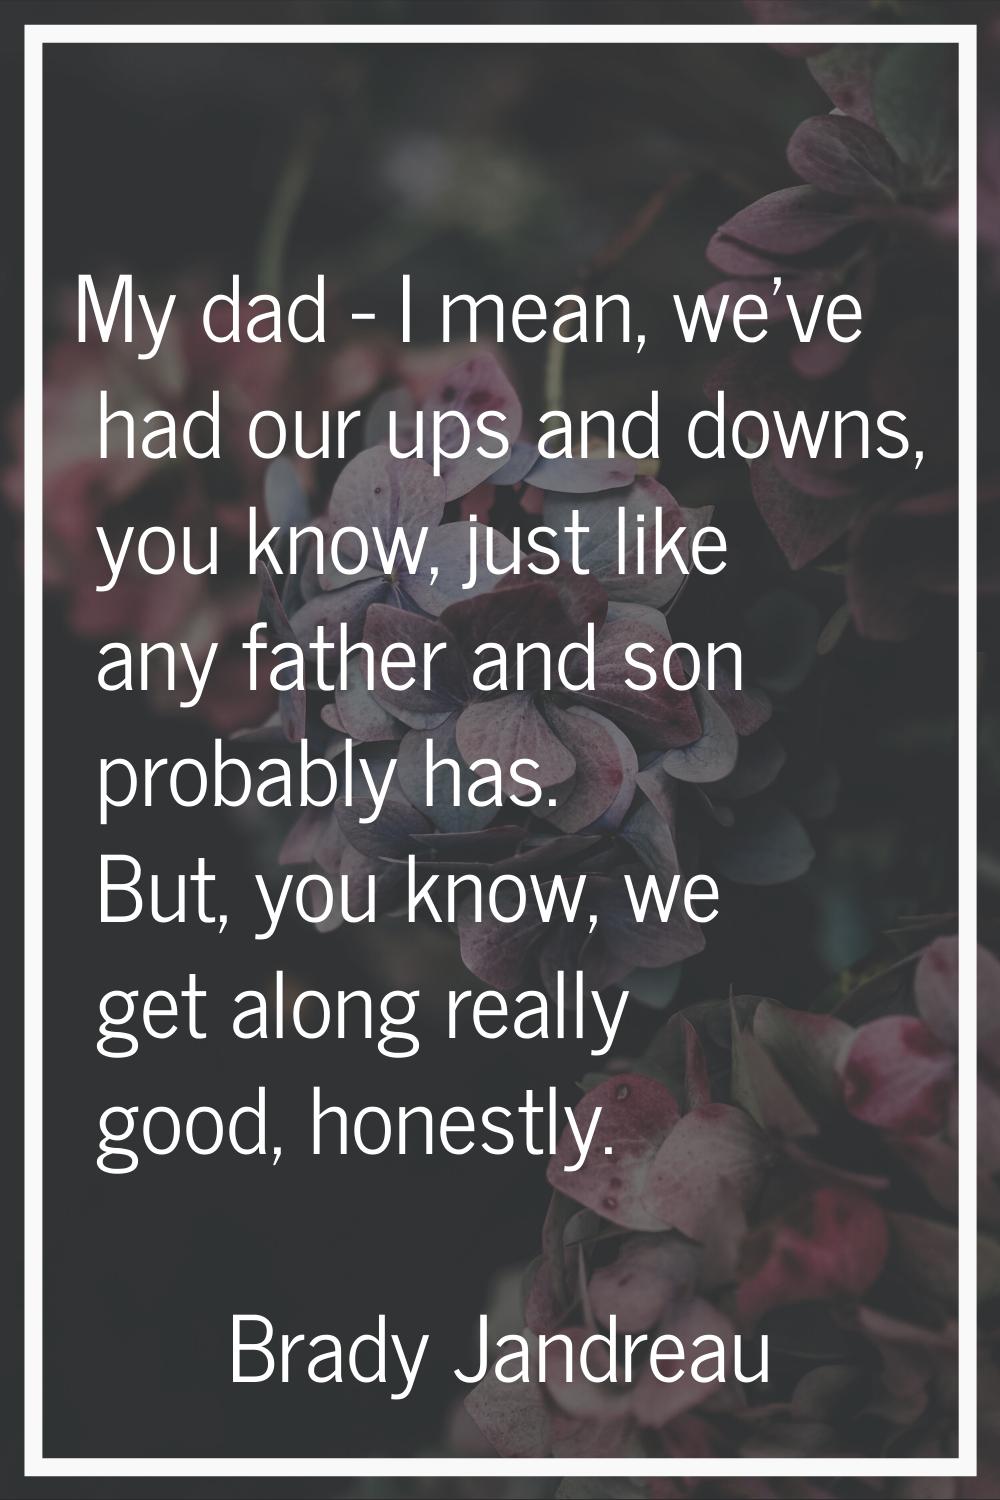 My dad - I mean, we've had our ups and downs, you know, just like any father and son probably has. 